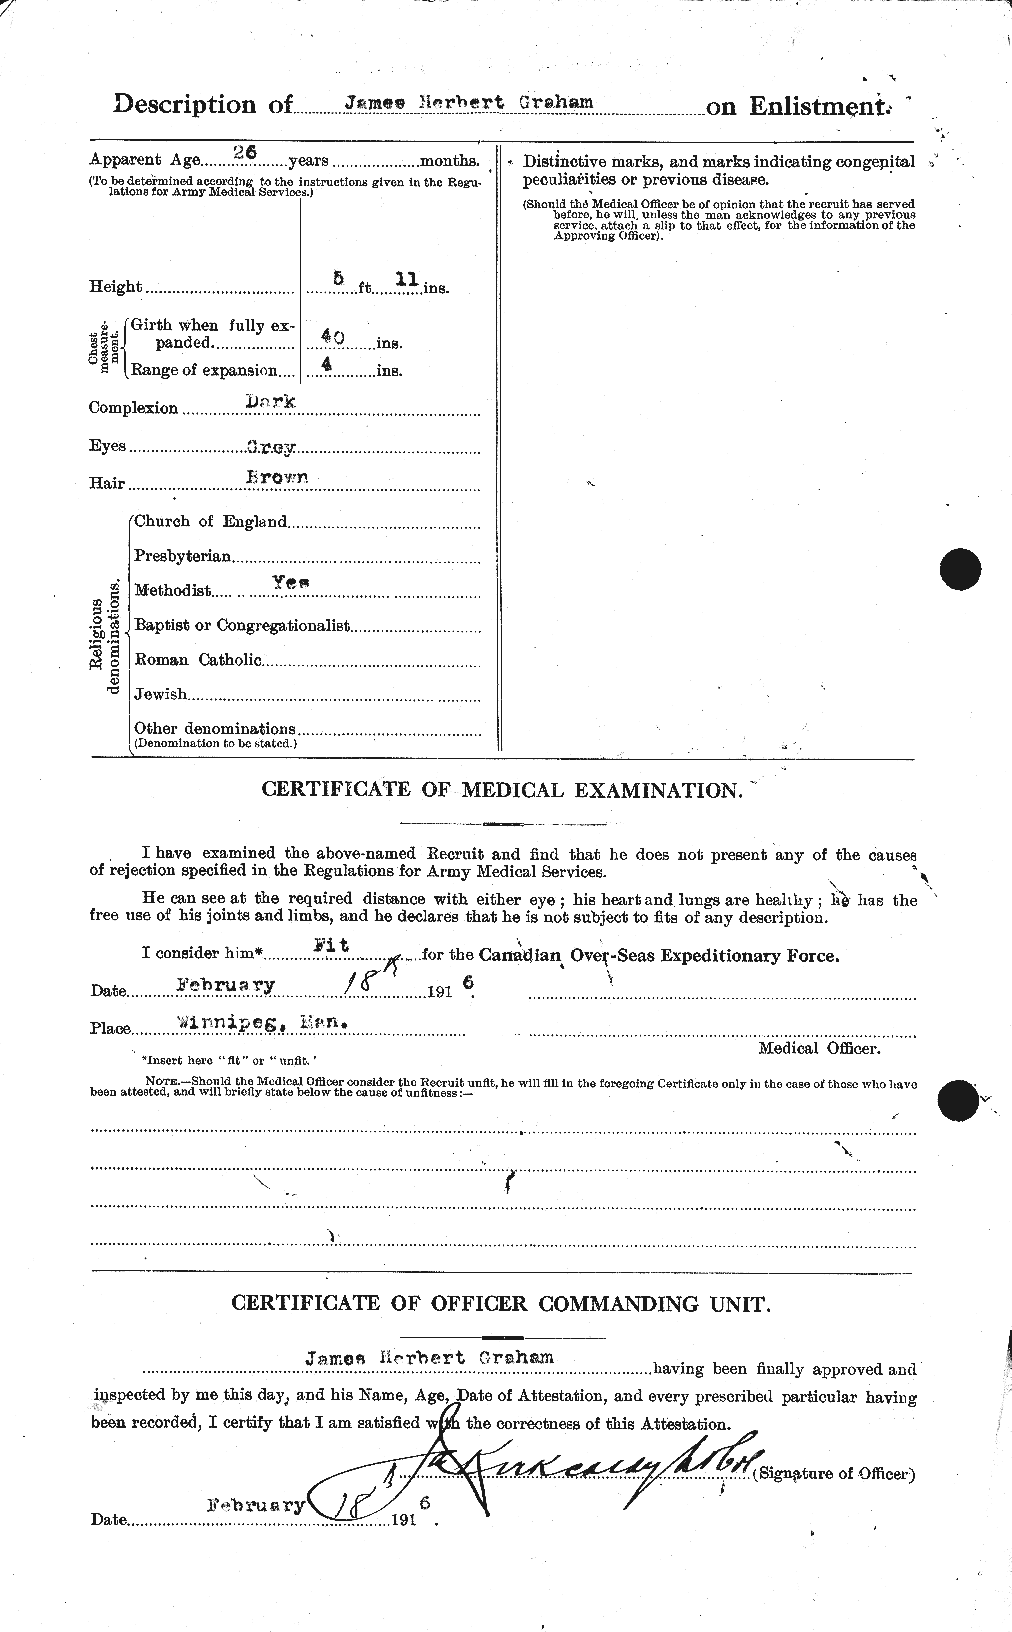 Personnel Records of the First World War - CEF 357825b